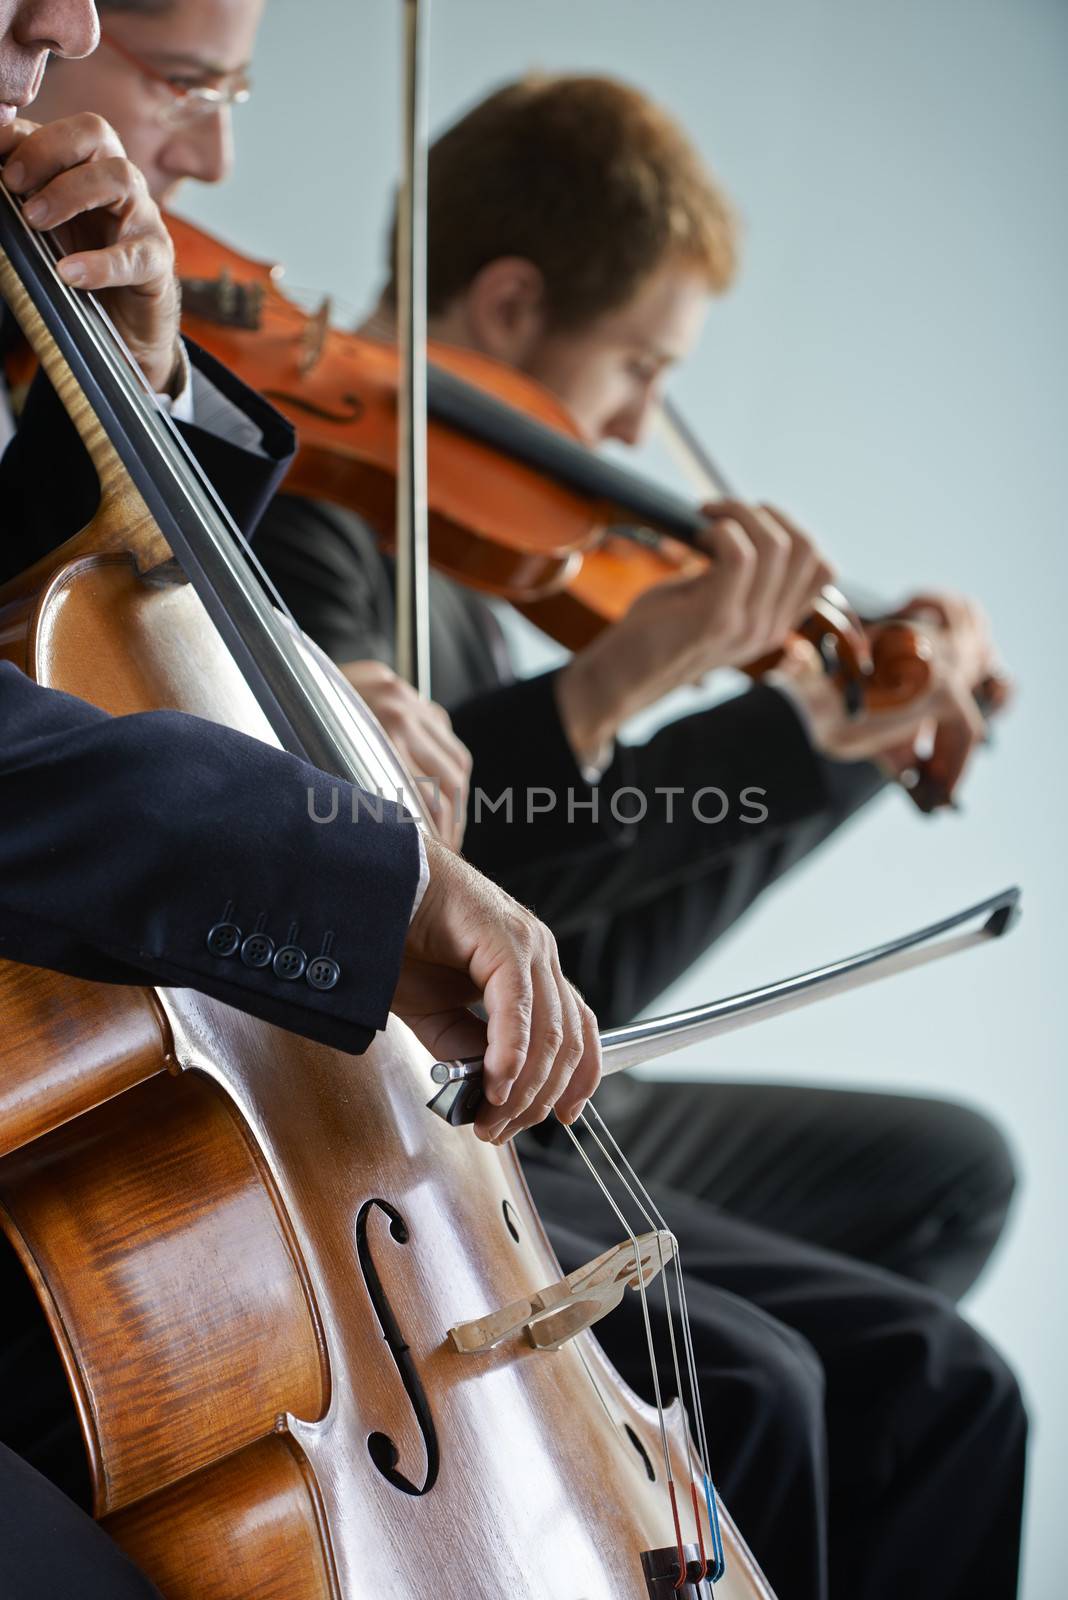 Cellist and violinist playing at the concert